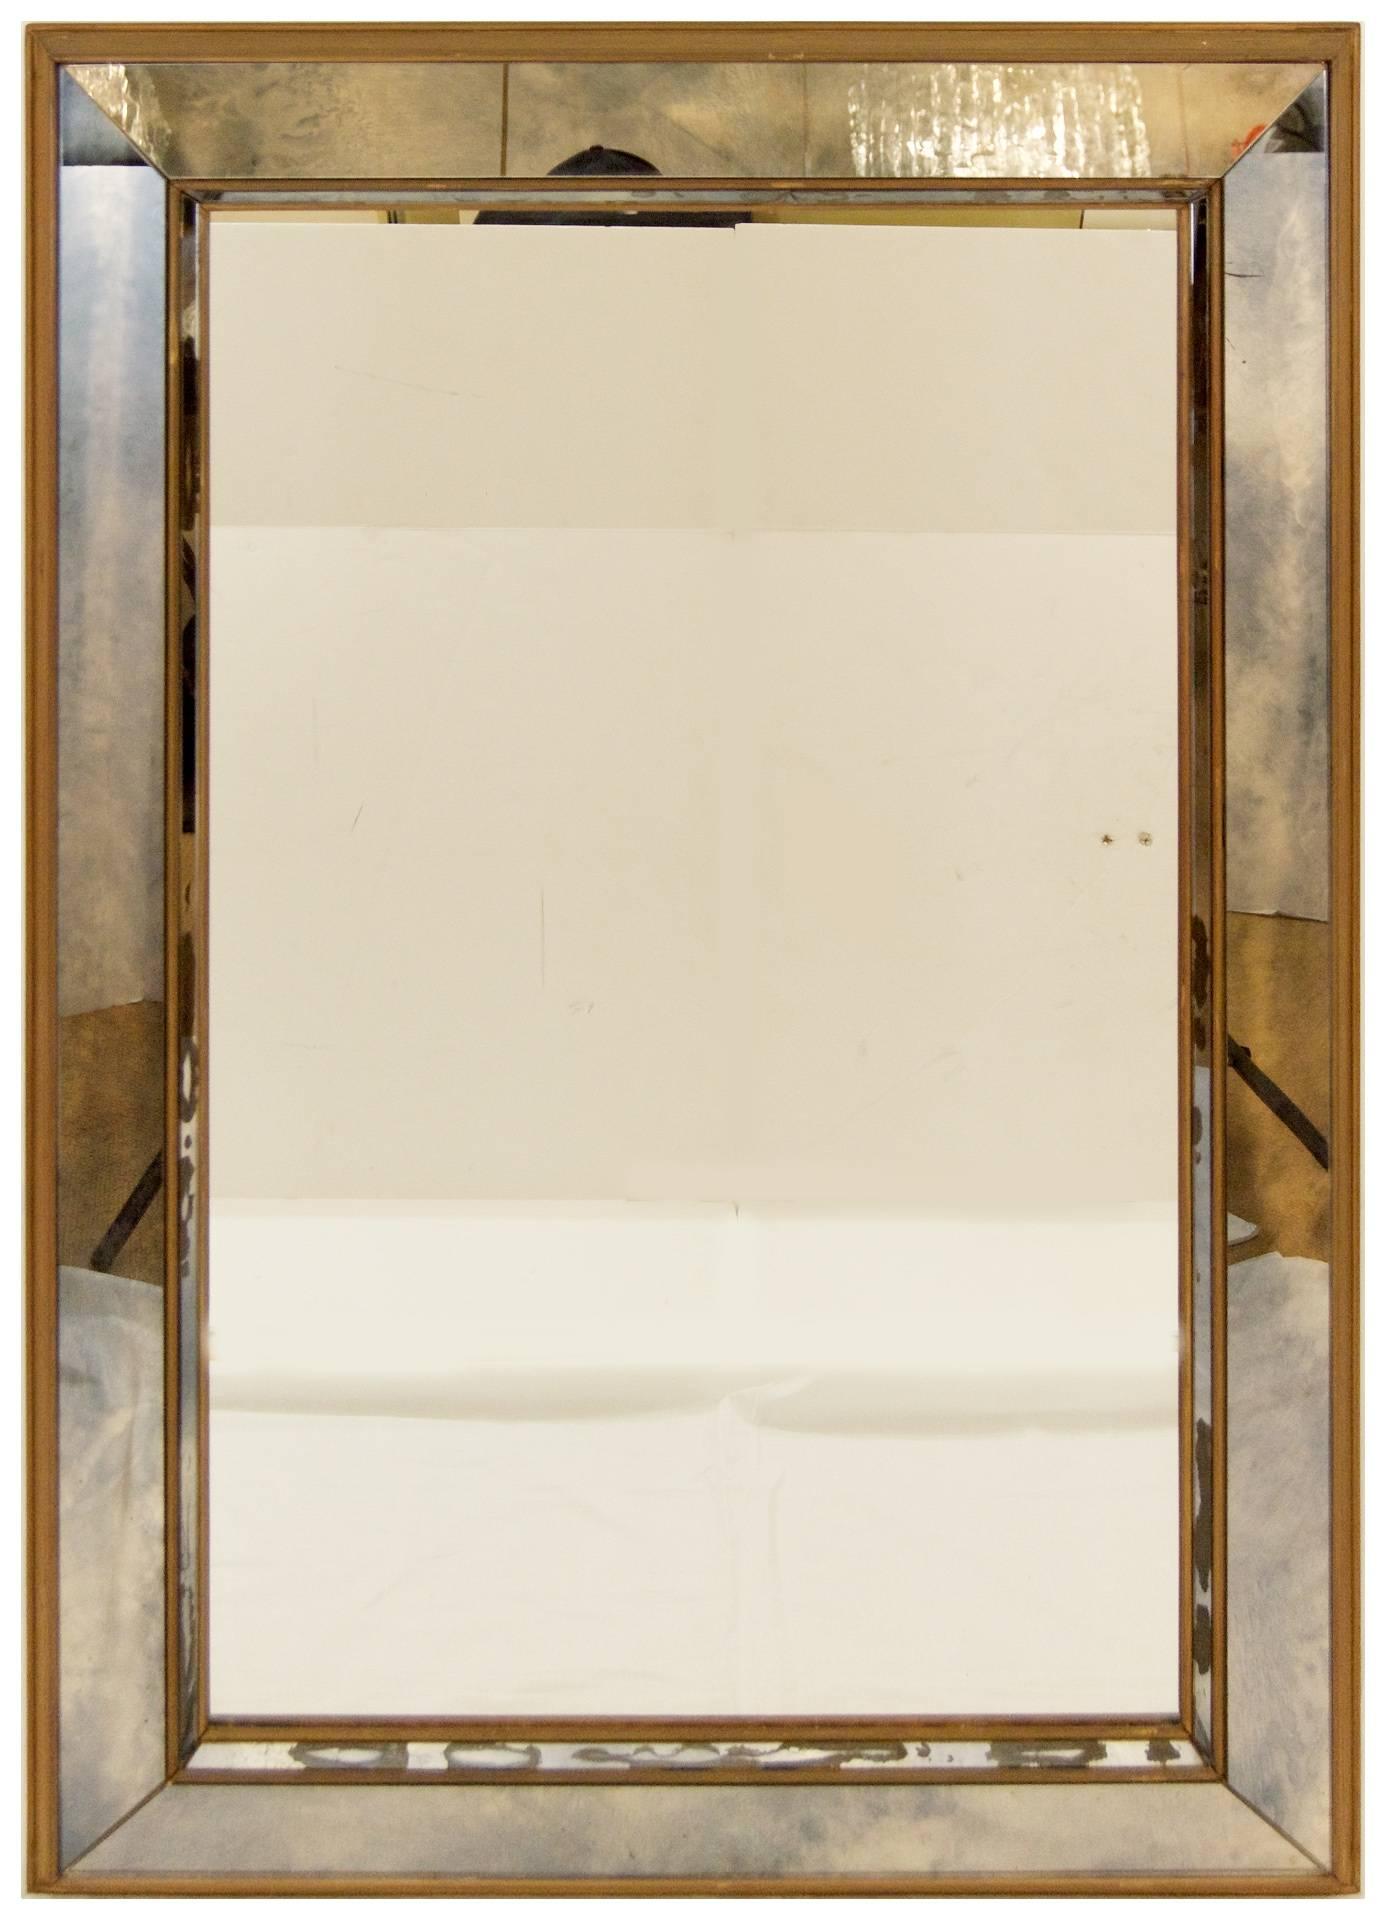 Vintage pair of mirrors, the central mirror bordered by angular antiqued mirror panels in a giltwood frame.

Can be hung horizontally or vertically.

See condition details; one narrow strip of mirror has been replaced, one strip has minor